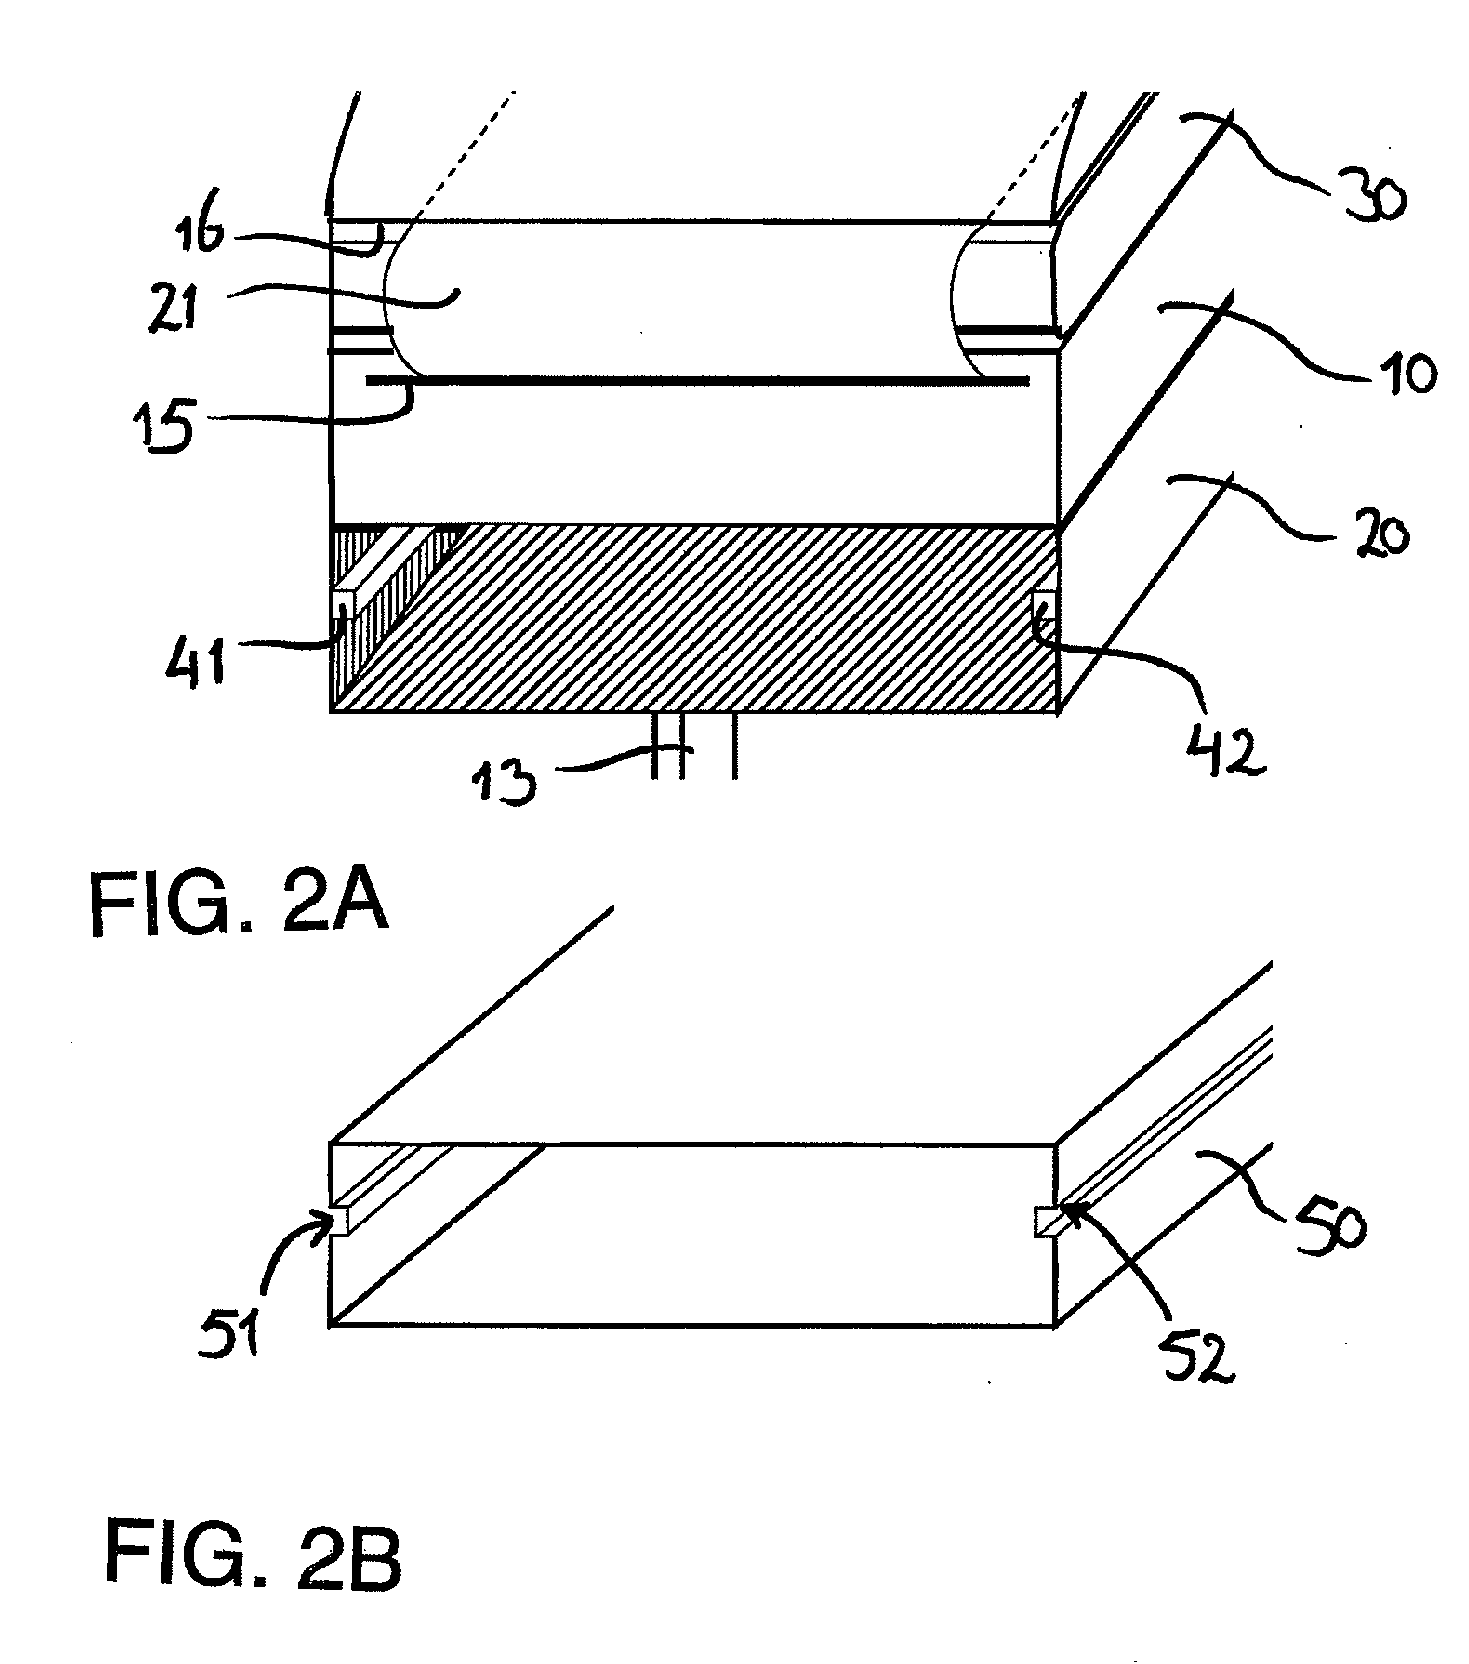 Printing system and folding module